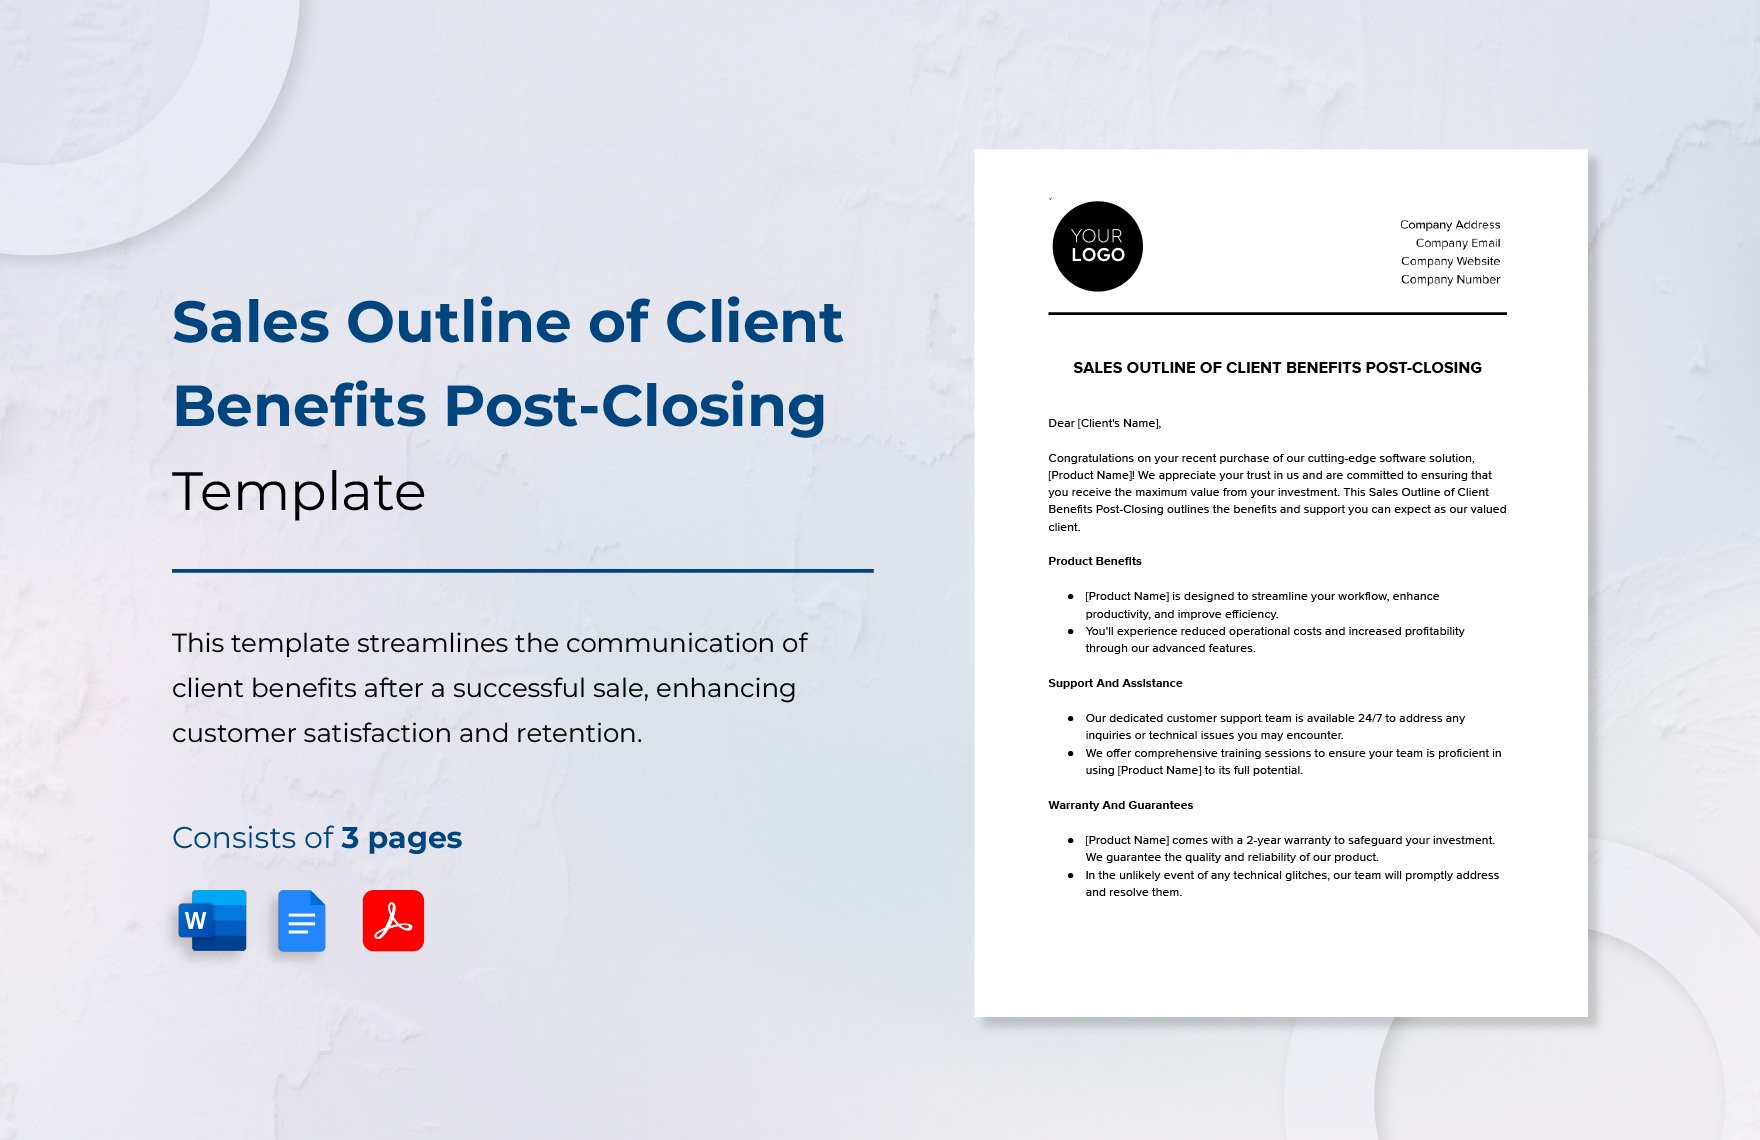 Sales Outline of Client Benefits Post-Closing Template